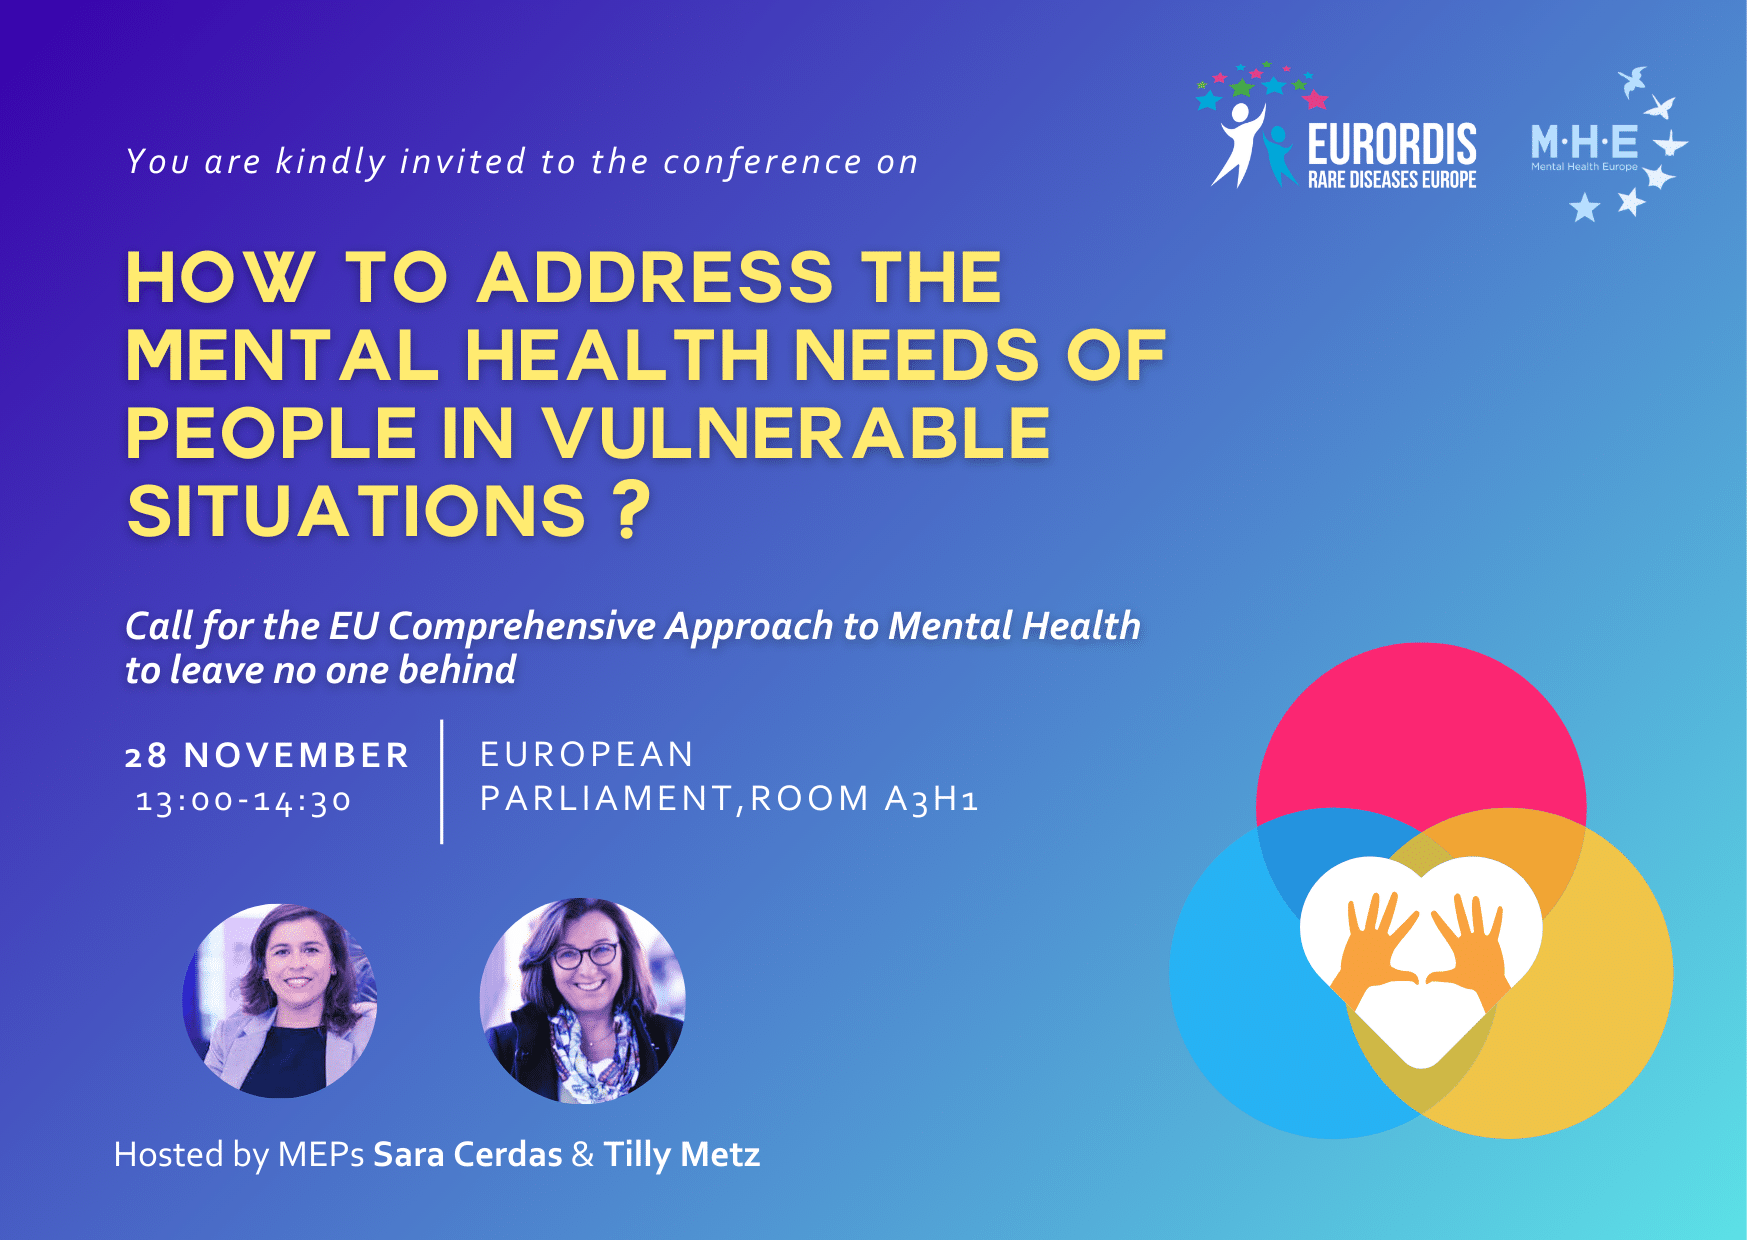 How to Address the Mental Health Needs of People in Vulnerable Situations? A Call for the EU Comprehensive Approach to Mental Health to Leave No One Behind
28 November 2023 at 13:00 – 14:30 CET, Room A3H1, European Parliament
